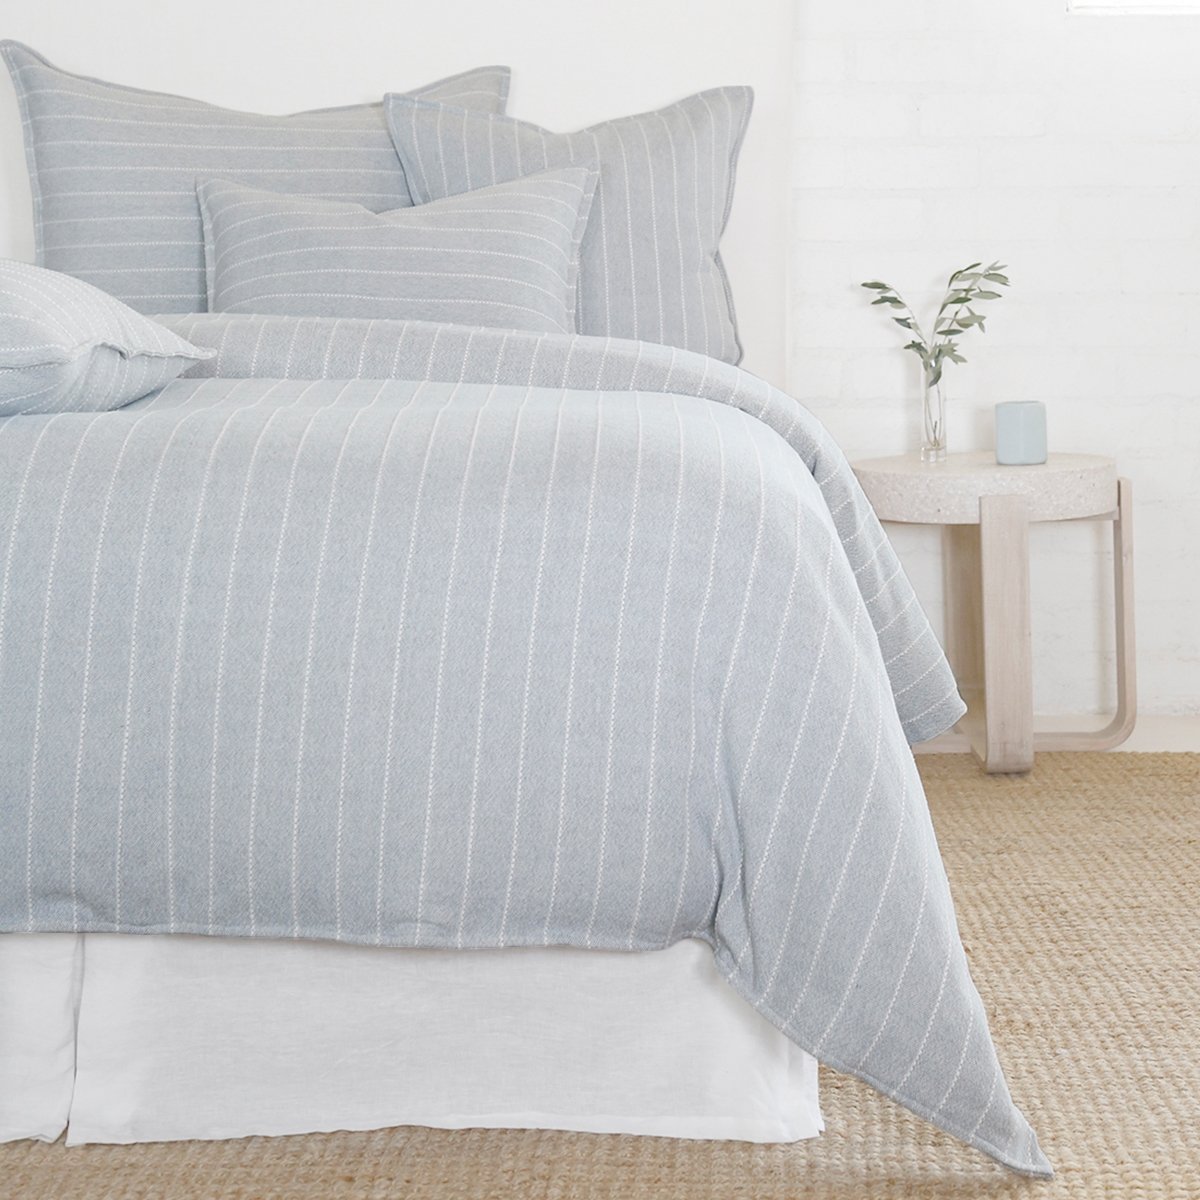 Henley Duvet by Pom at Home